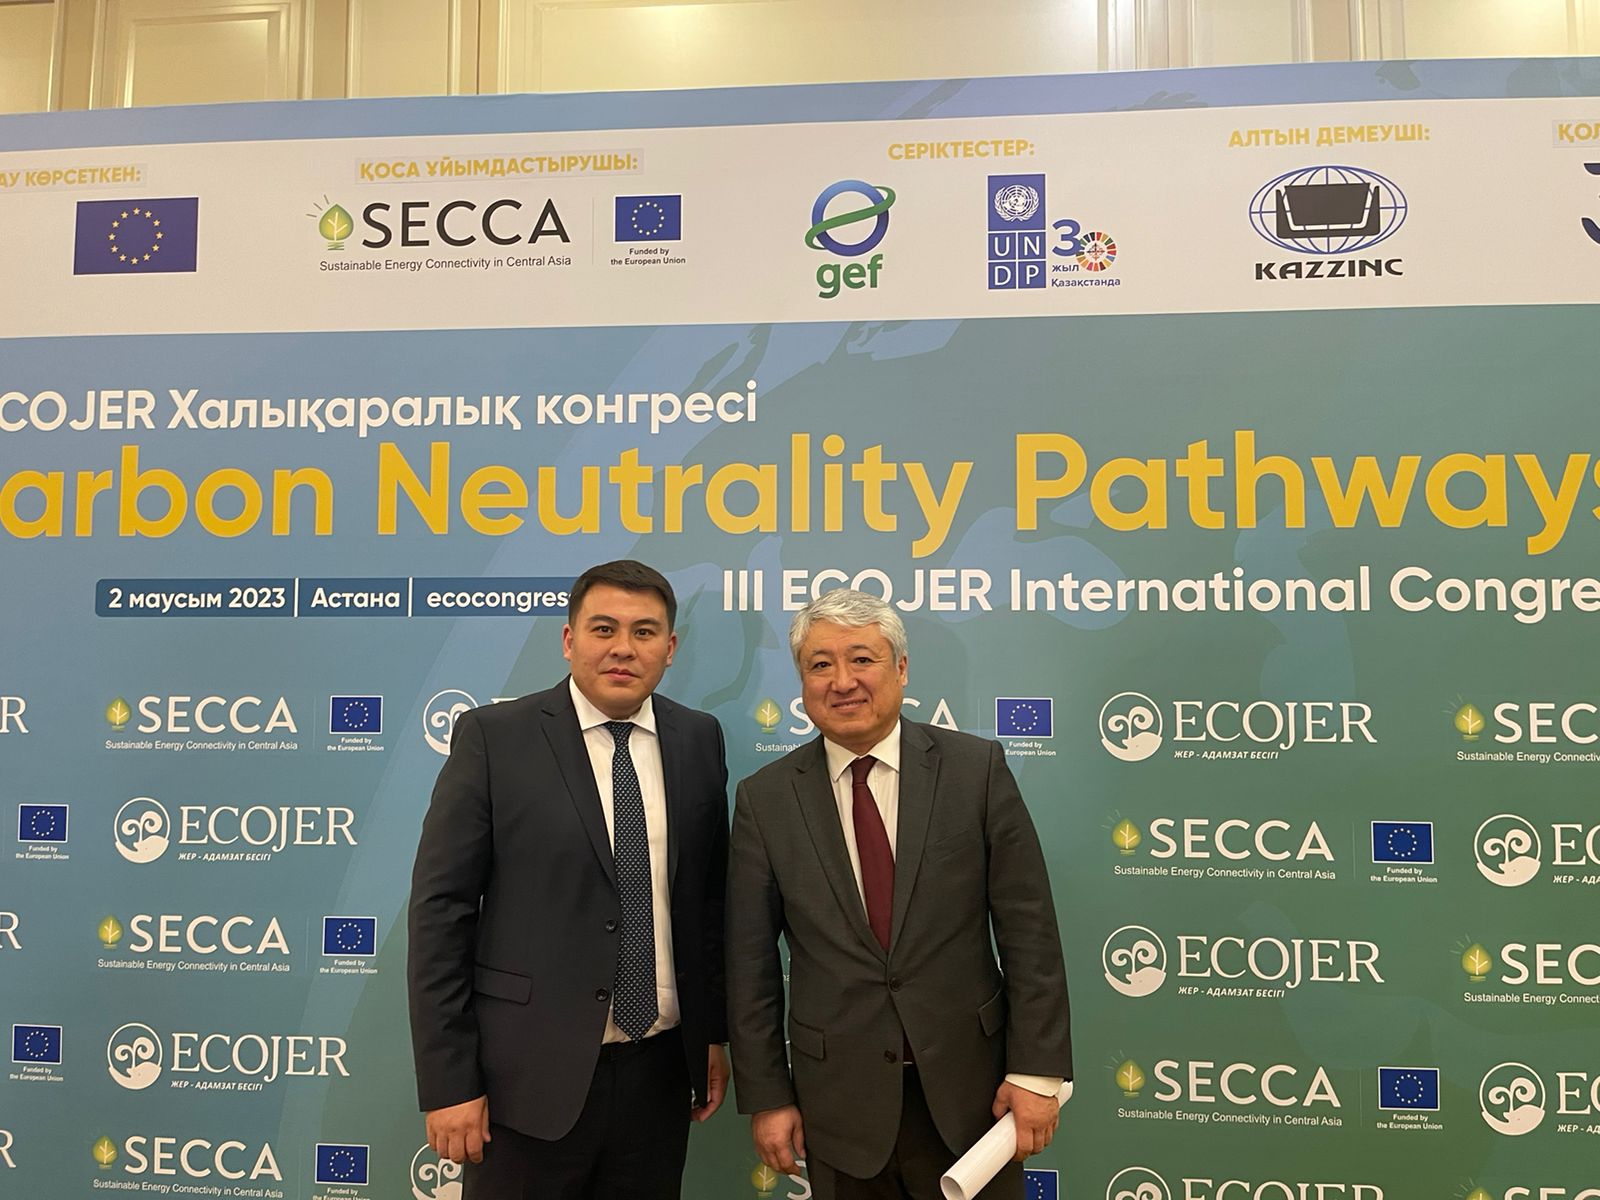 GTH’s Participation in the 3rd International Congress on Ecojer Carbon Neutrality Pathways